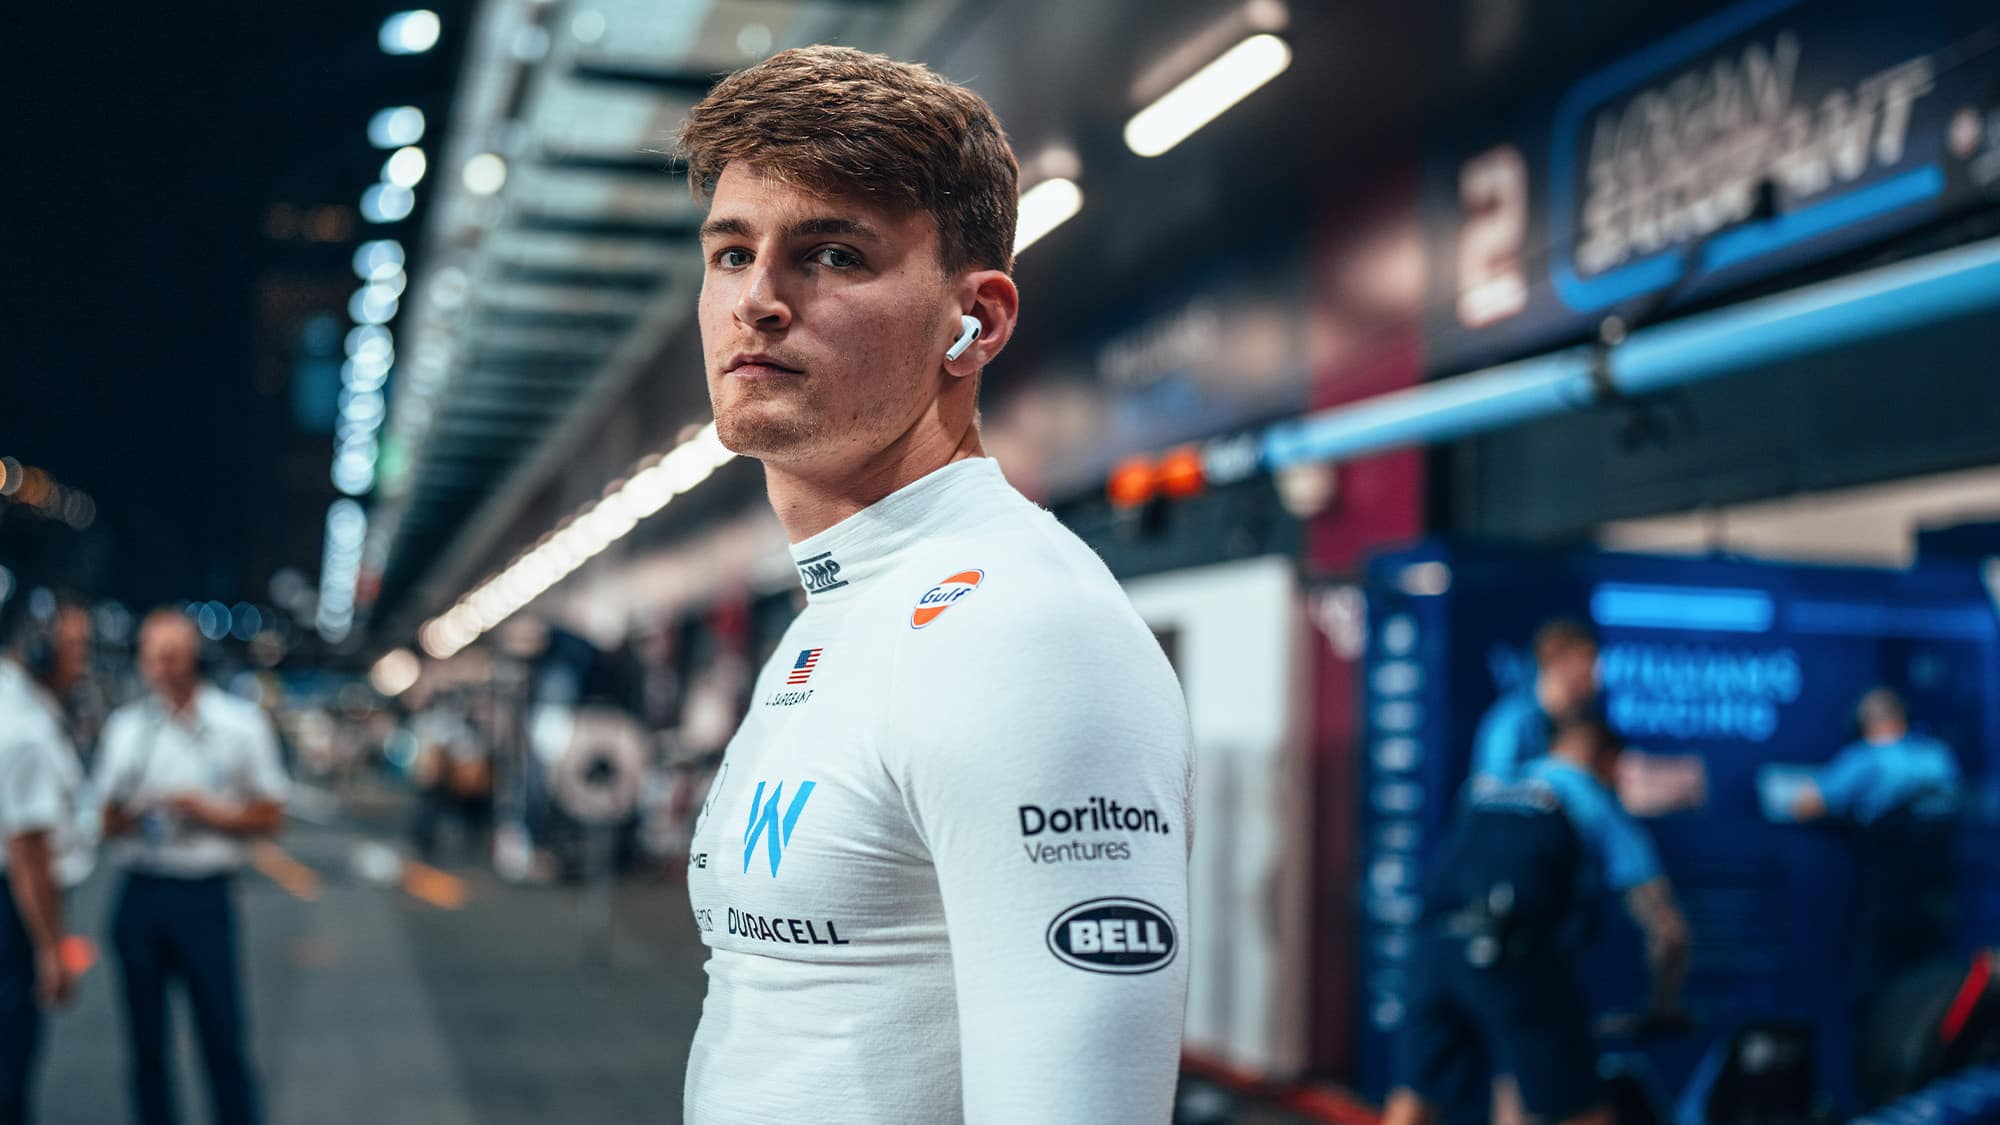 Logan Sargeant in F1 pitlane for Williams